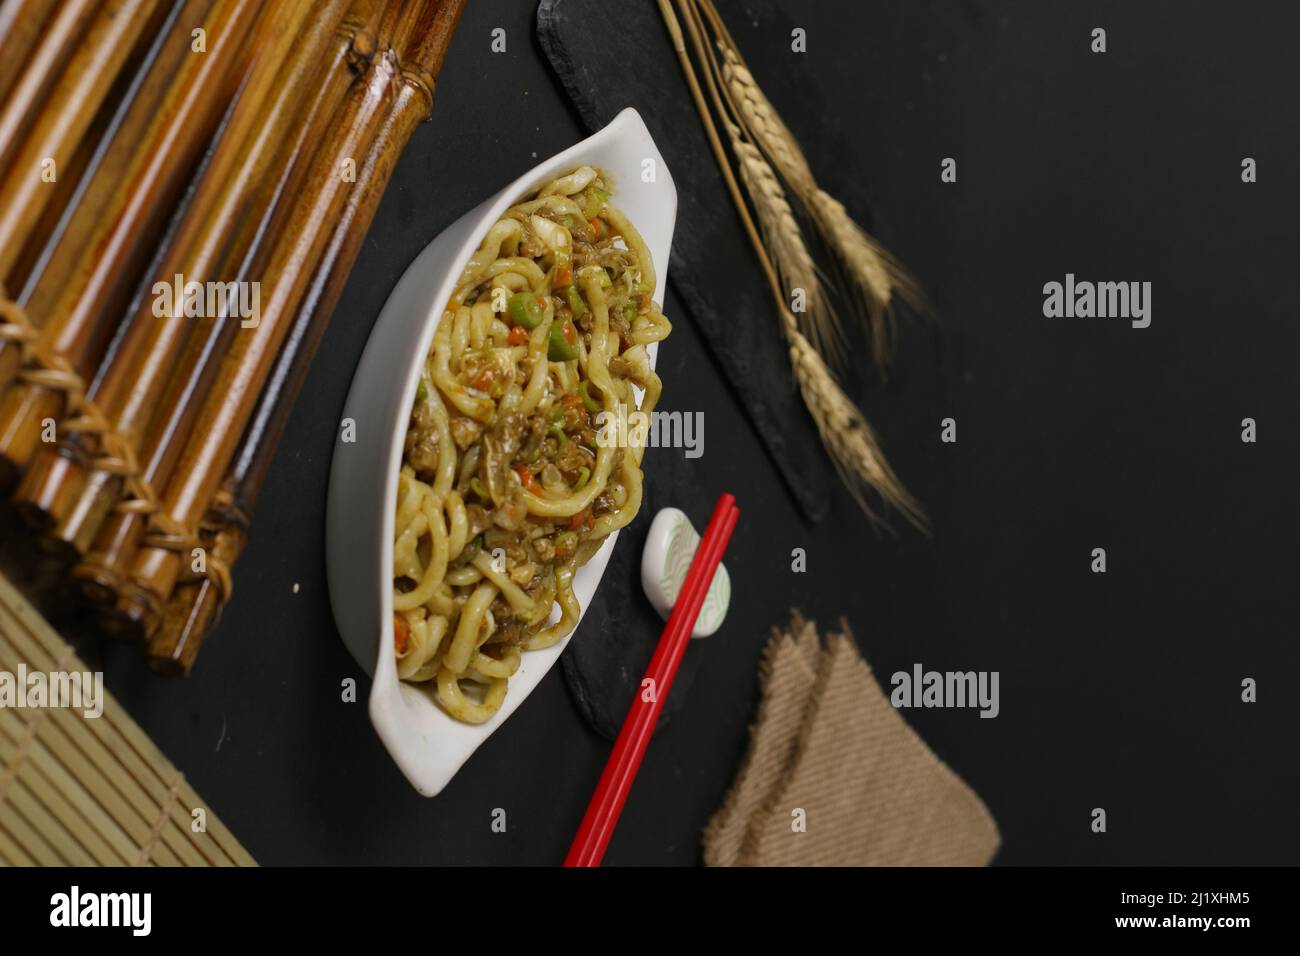 A rotated view of a plate full of Japanese noodles with meat and vegetables Stock Photo